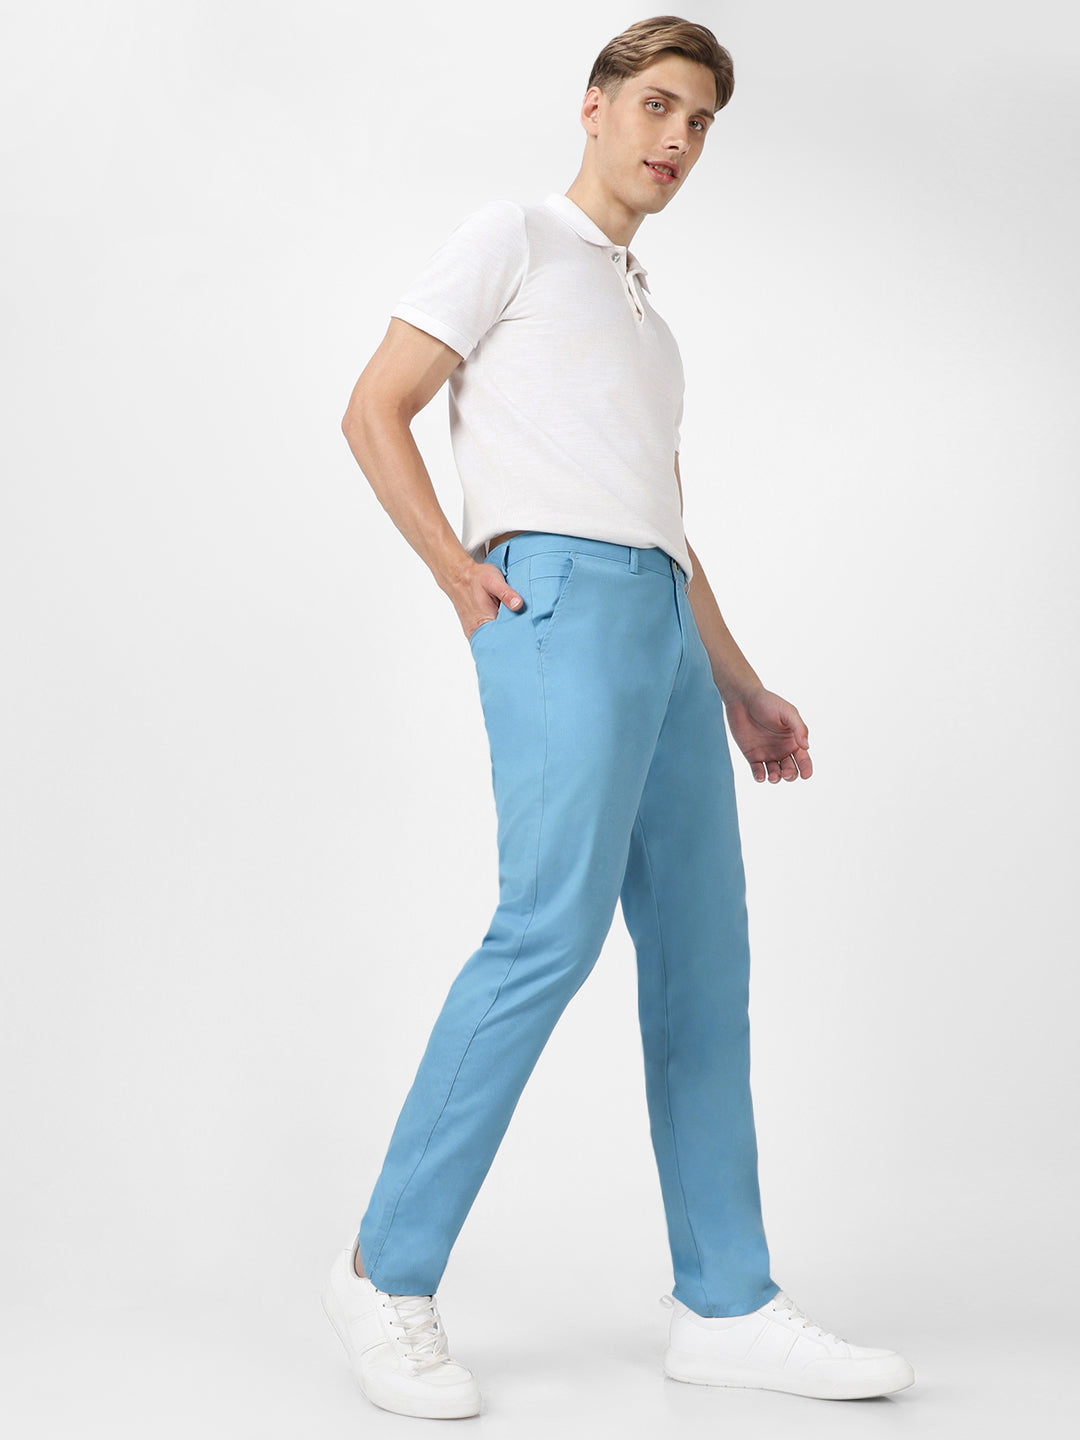 Men's Blue Cotton Light Weight Non-Stretch Slim Fit Casual Trousers